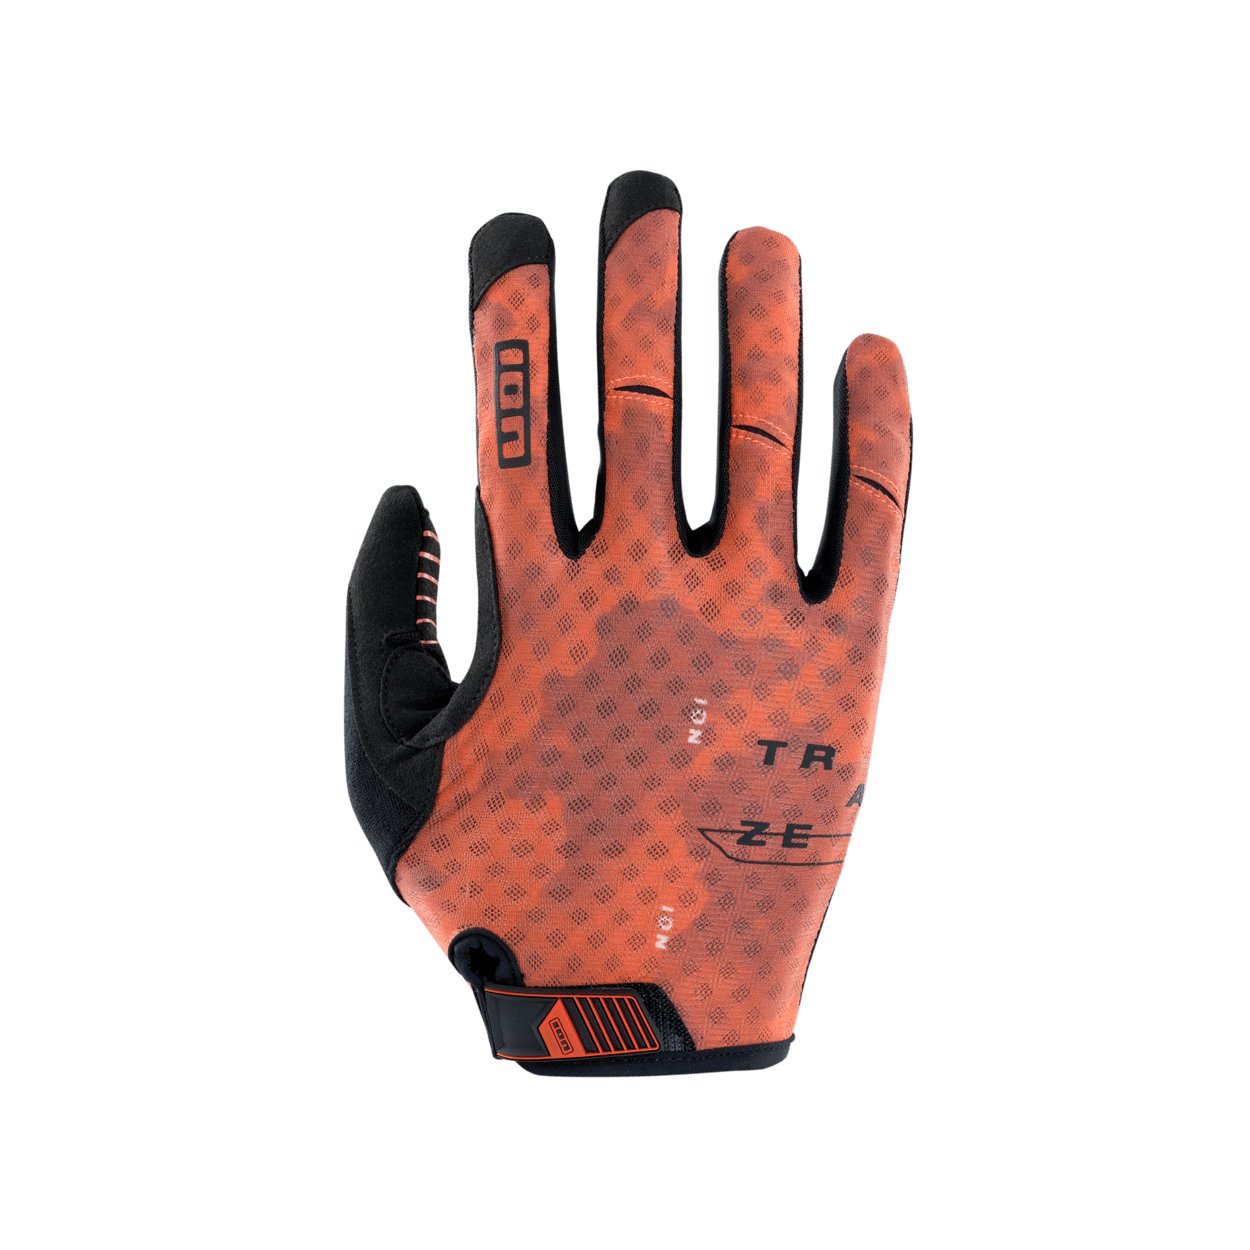 ION MTB Gloves Traze Long 2022 - Worthing Watersports - 9010583028019 - Gloves - ION Bike